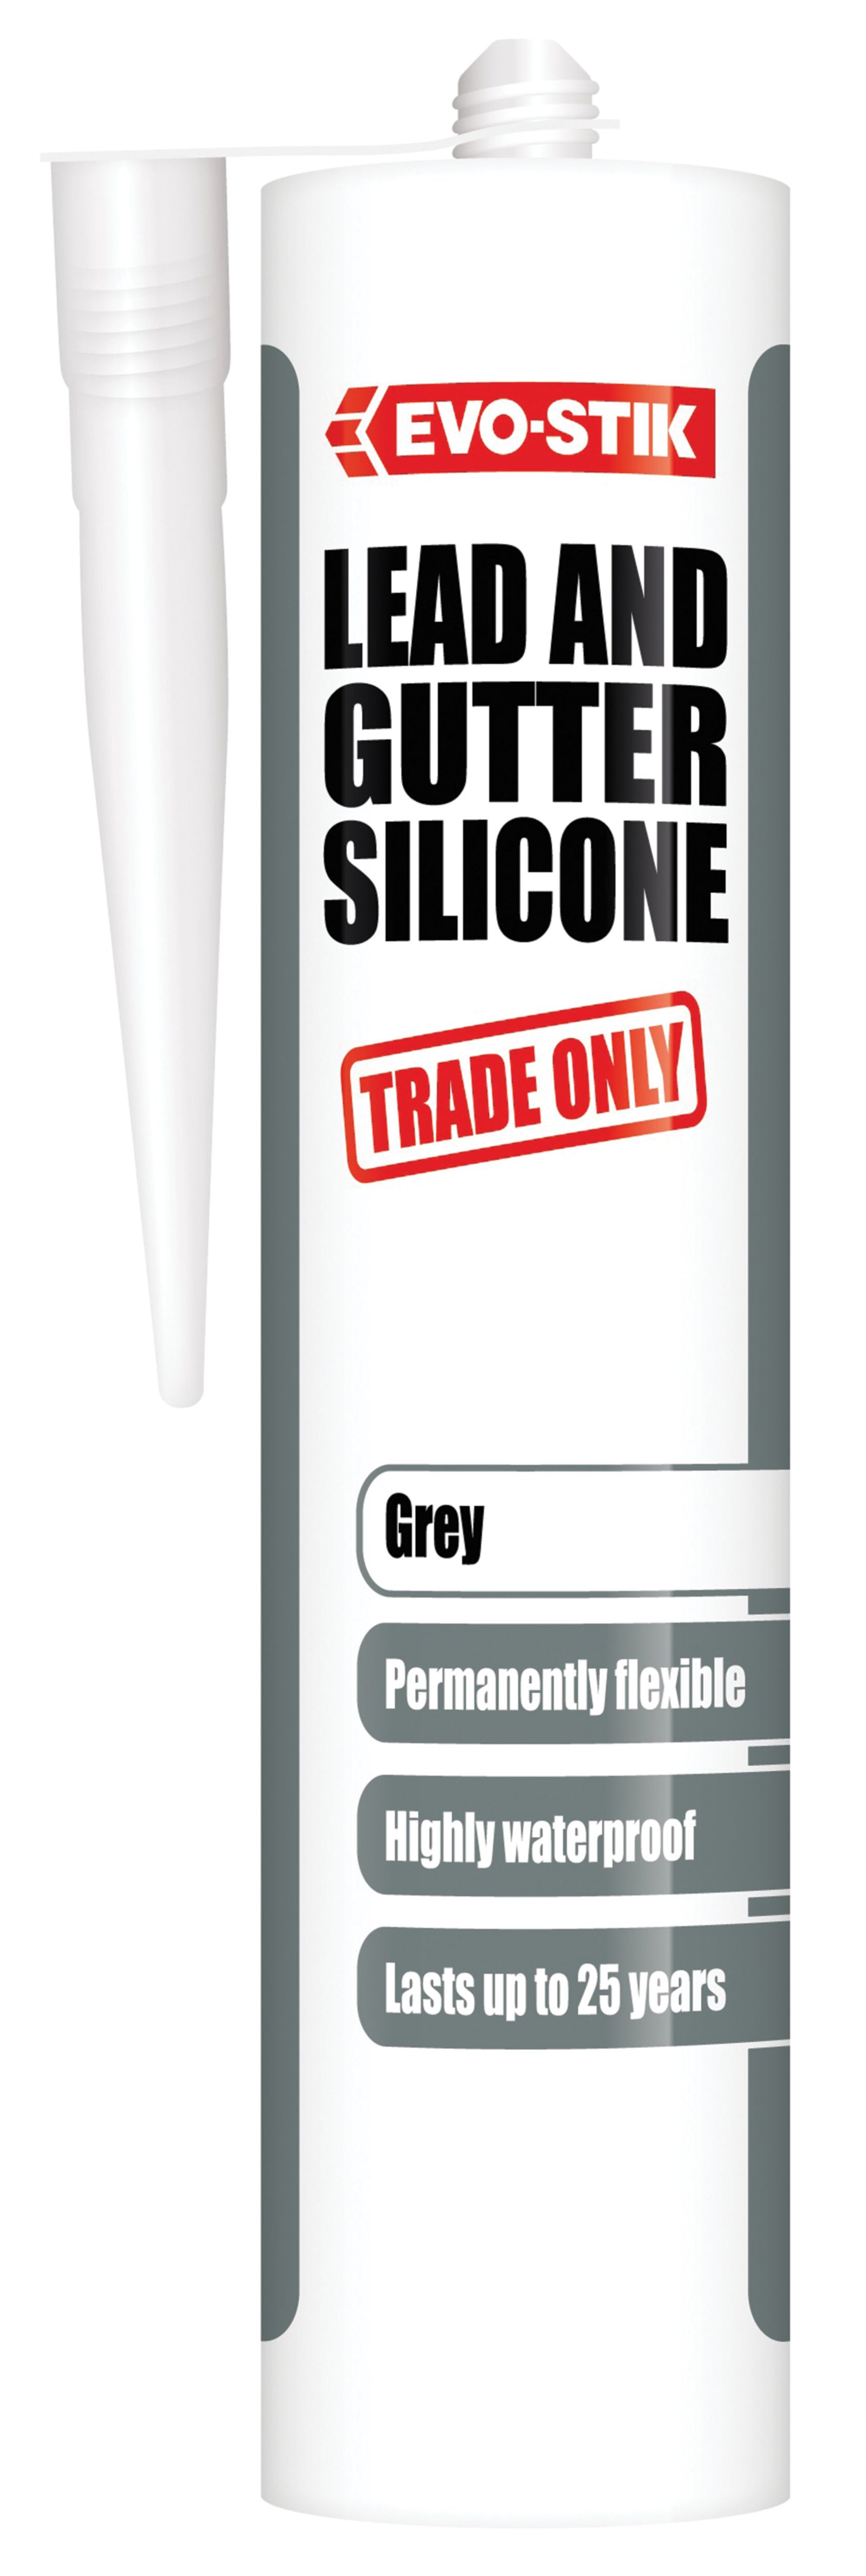 Image of Evo-Stik Trade Only Lead & Gutter Silicone - Grey 280ml